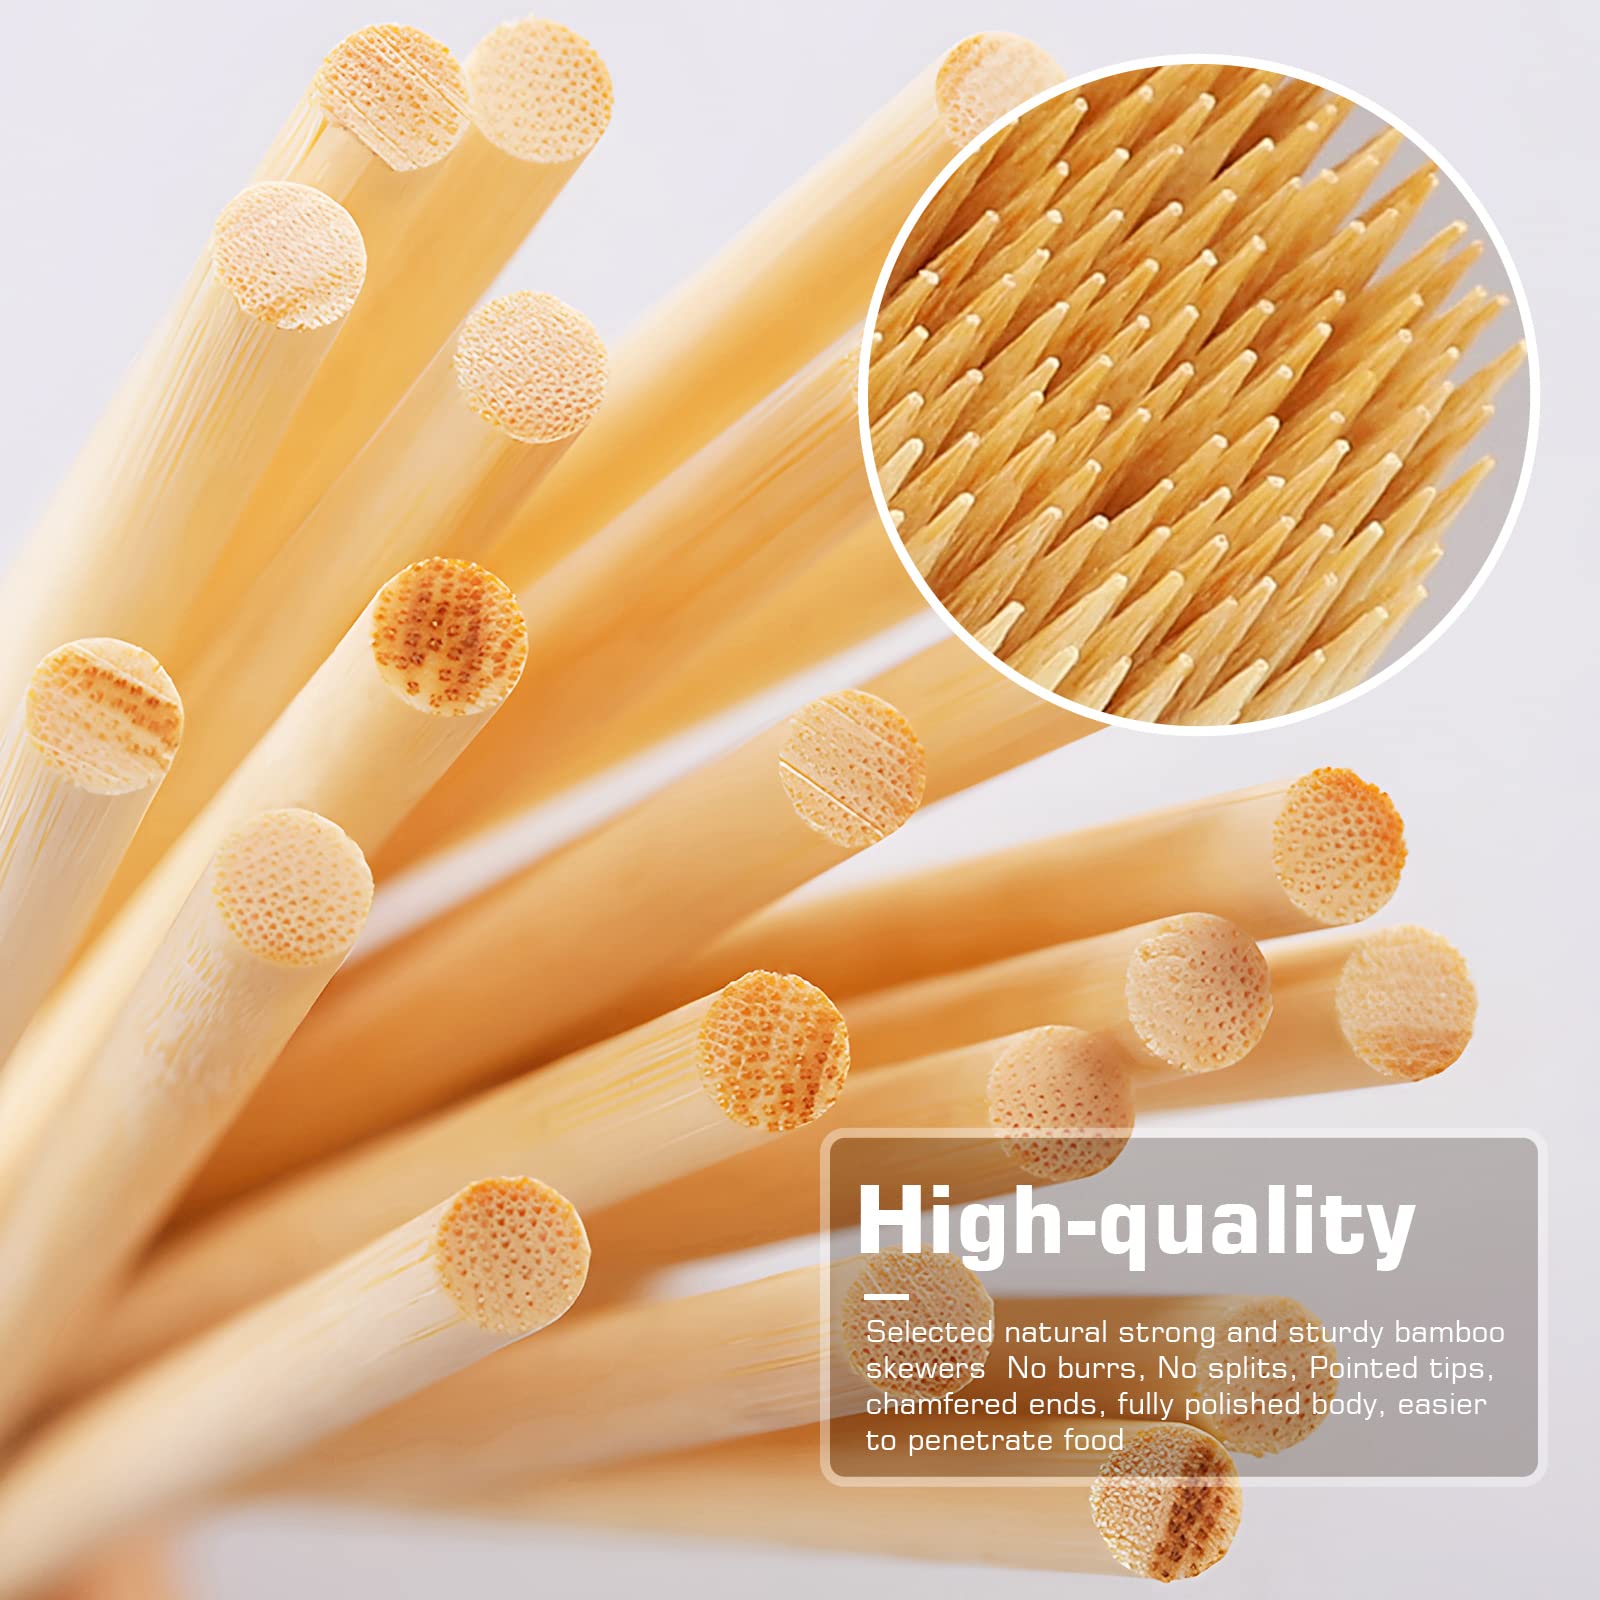  200 PCS Bamboo Skewers for Appetizers, 4.7 Inch